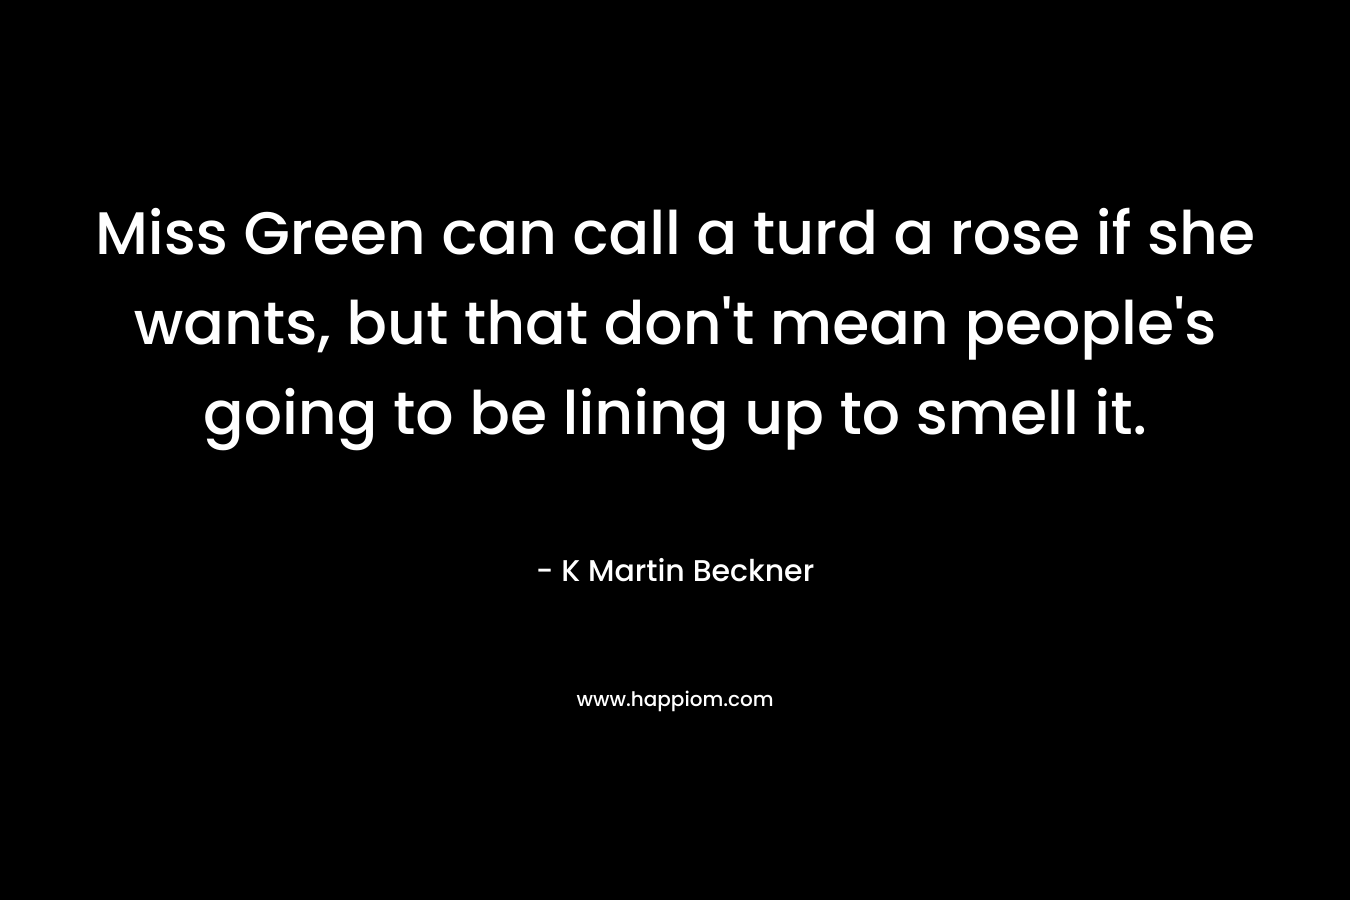 Miss Green can call a turd a rose if she wants, but that don’t mean people’s going to be lining up to smell it. – K Martin Beckner